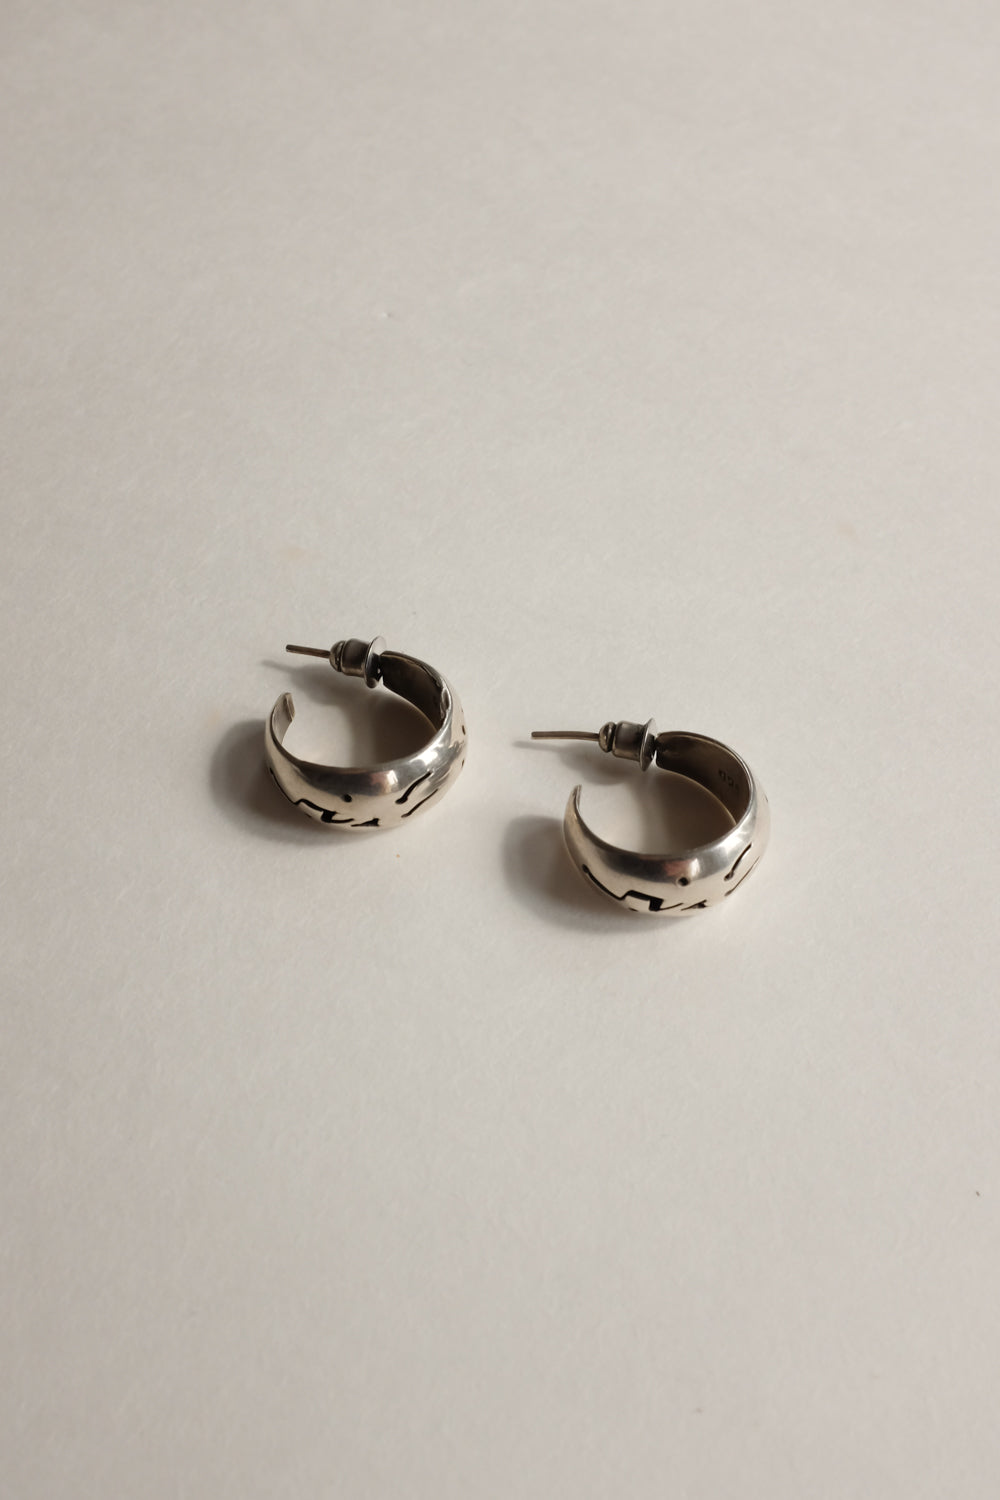 VINTAGE BOLD SILVER SMALL EARRINGS